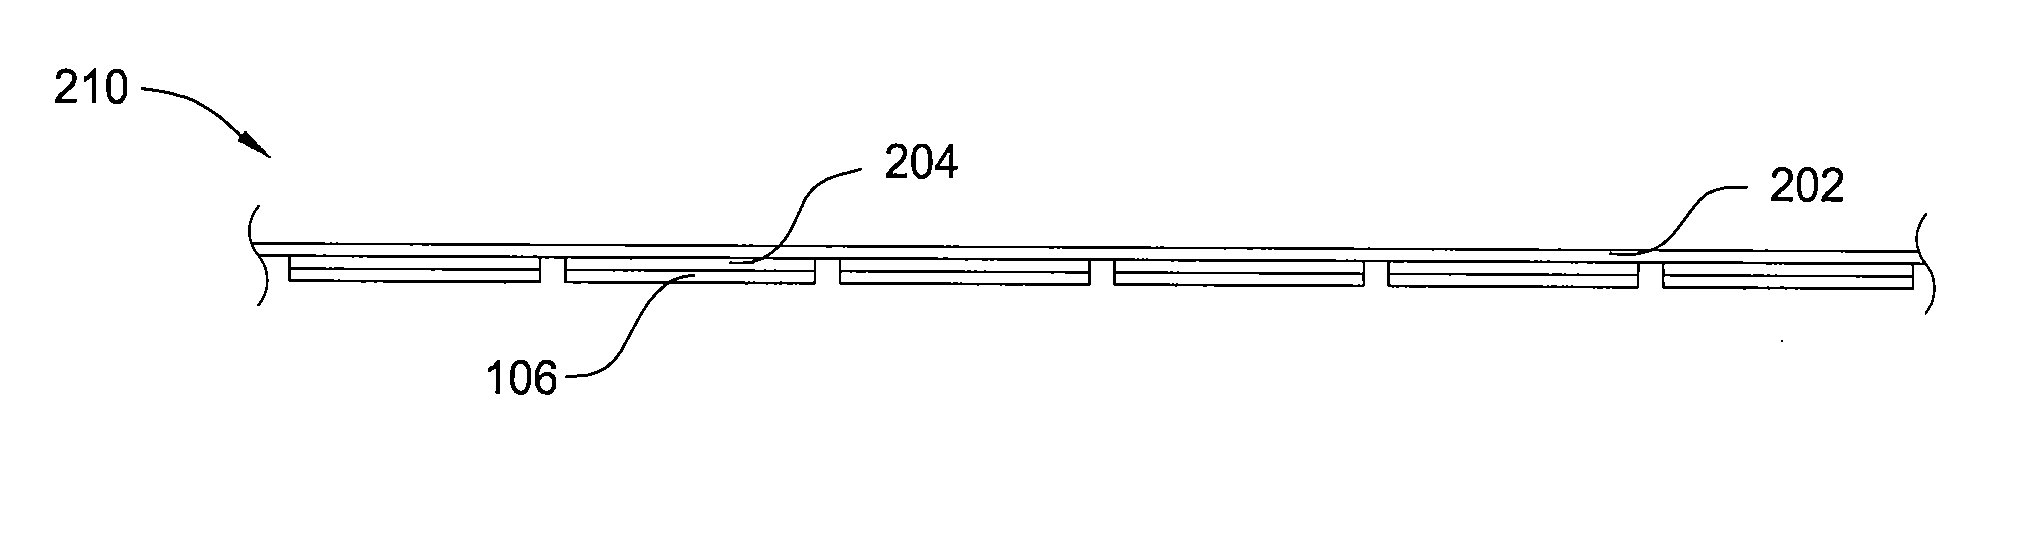 Tape-based epitaxial lift off apparatuses and methods